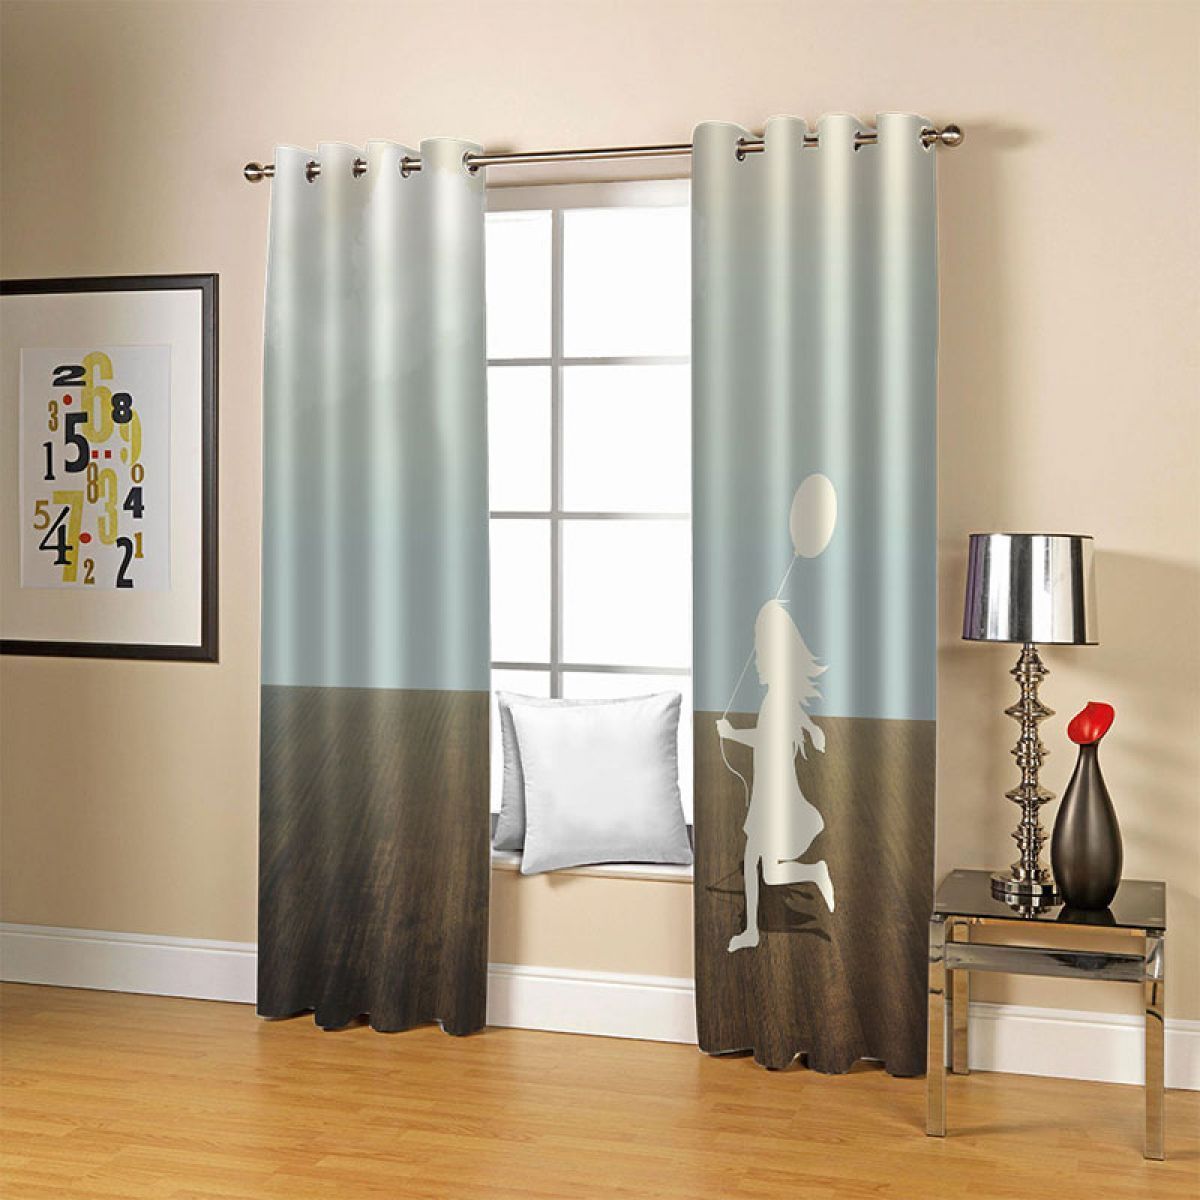 3d Little Girl With A Balloon Printed Window Curtain Home Decor